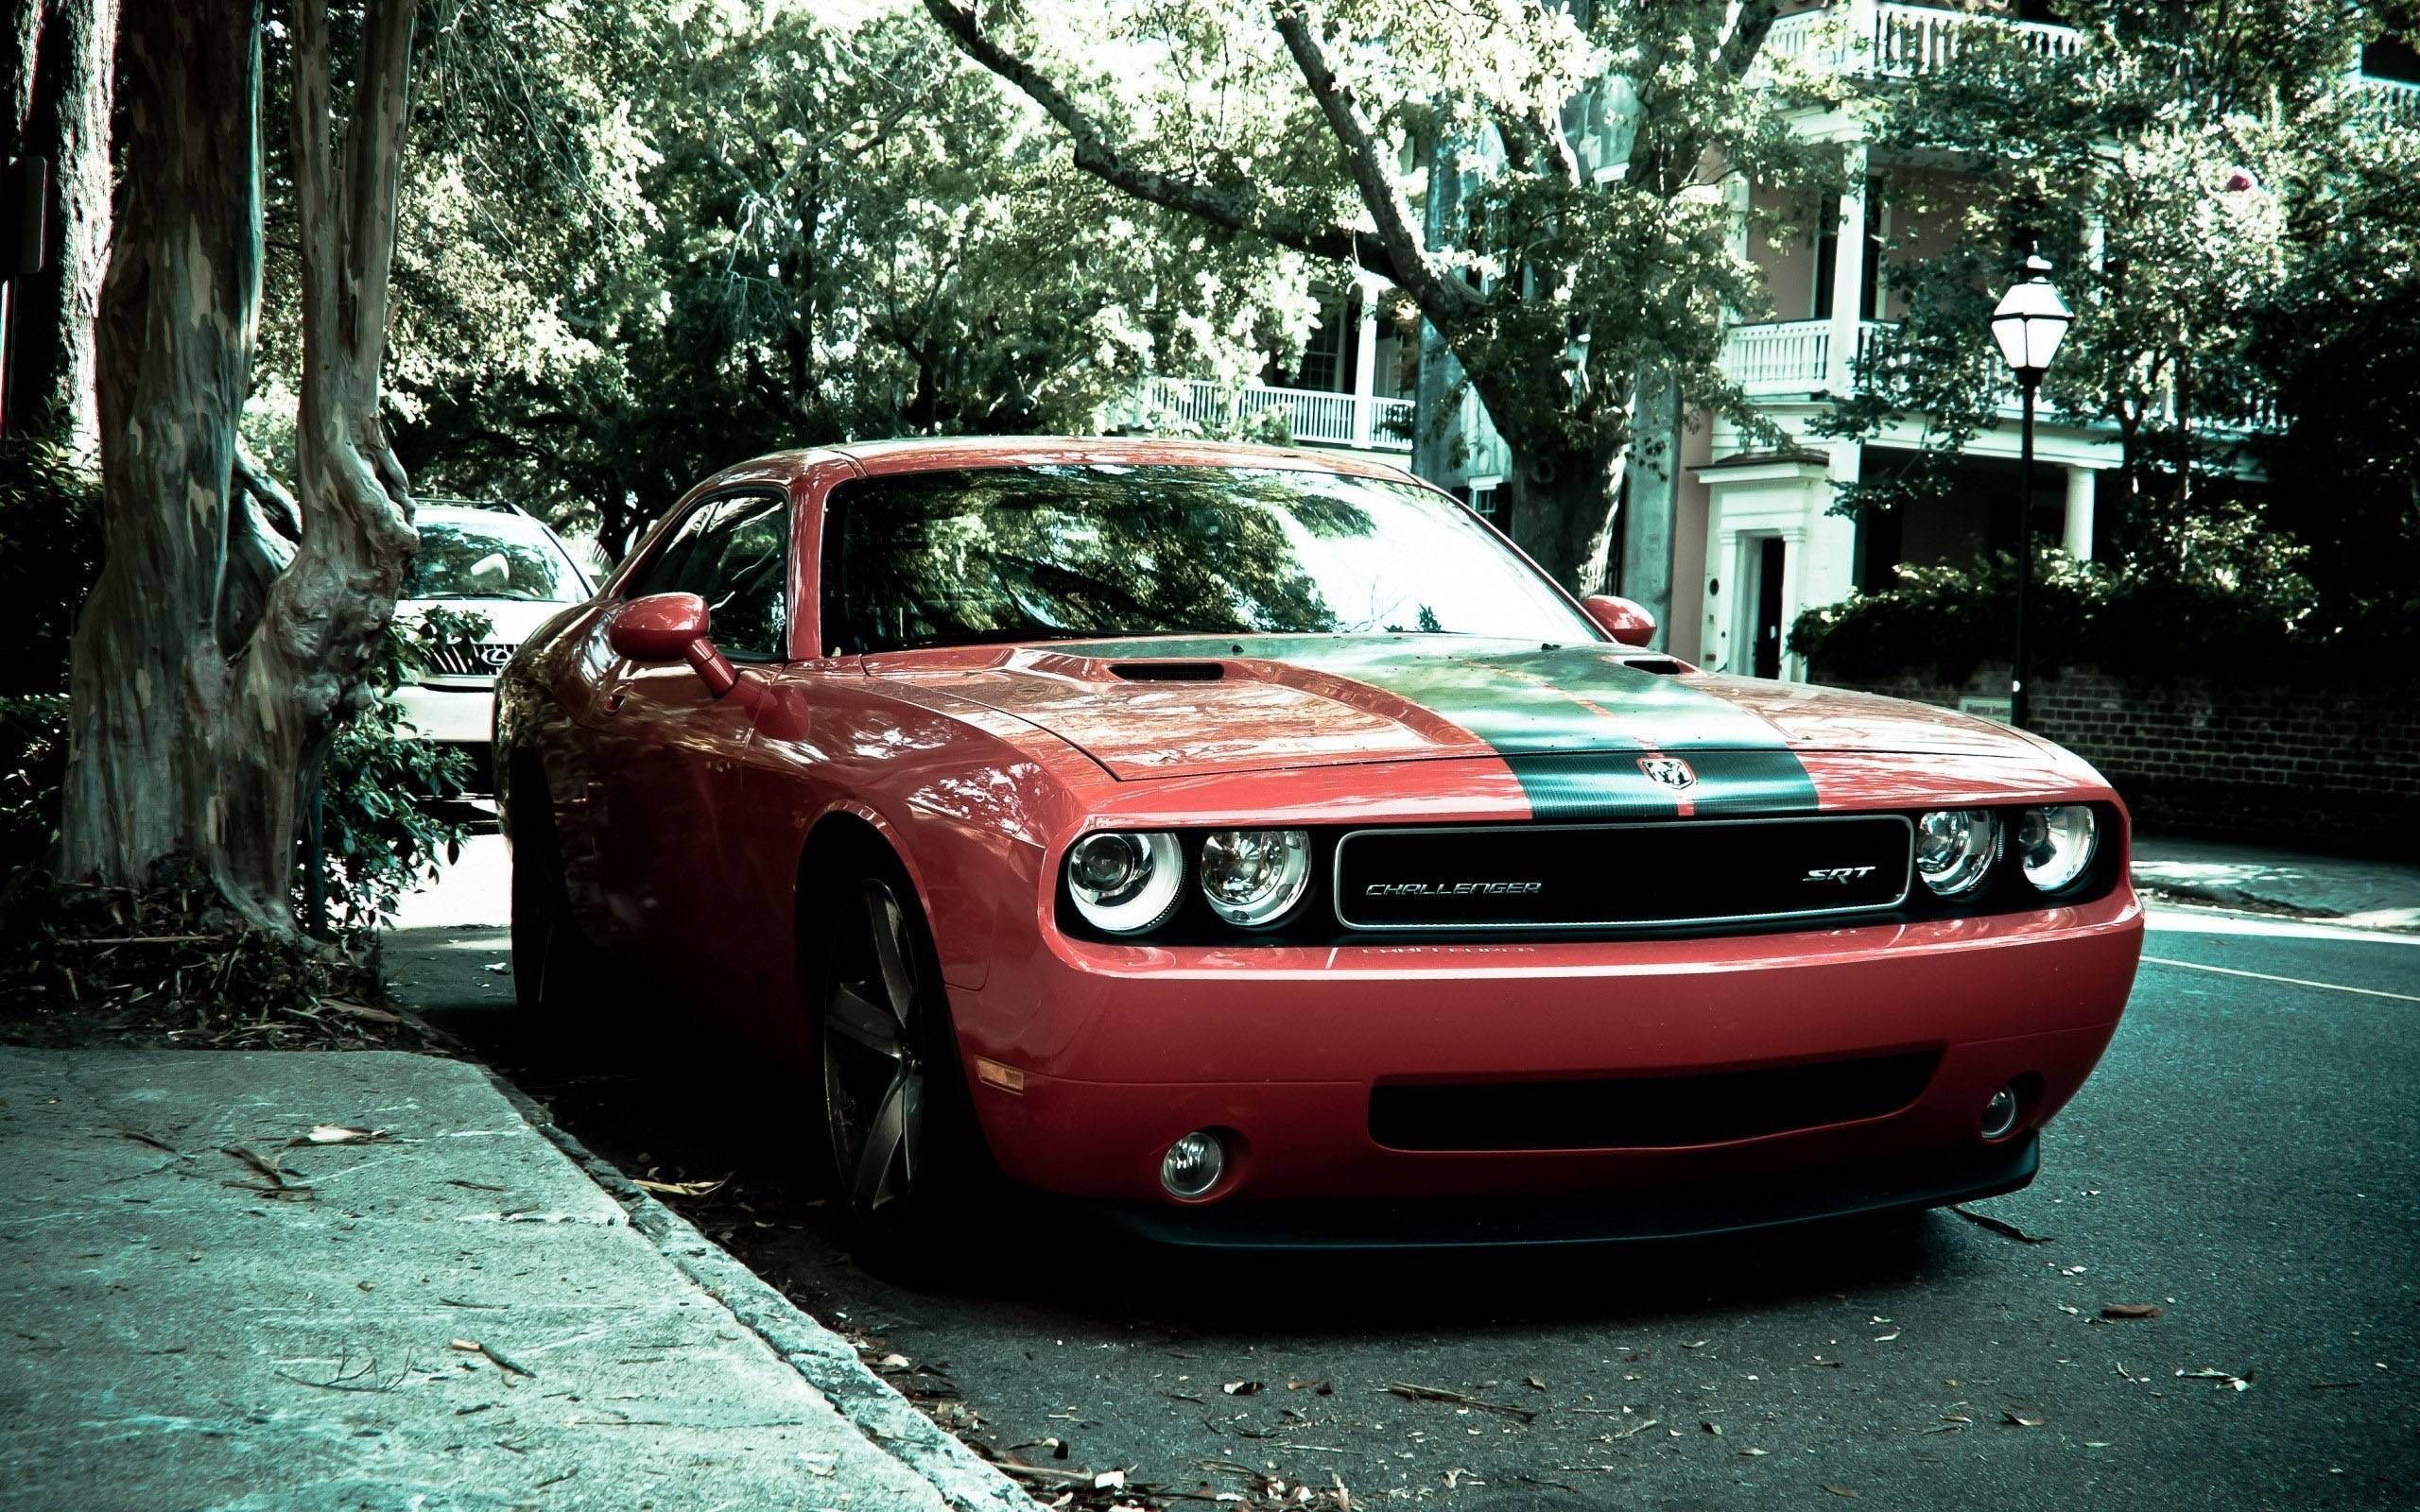 2560x1600 Backgrounds Muscle Cars Hd Cave Images For American Car Wallpaper Smartphone | Dodge challenger, Dodge challenger srt, Muscle cars